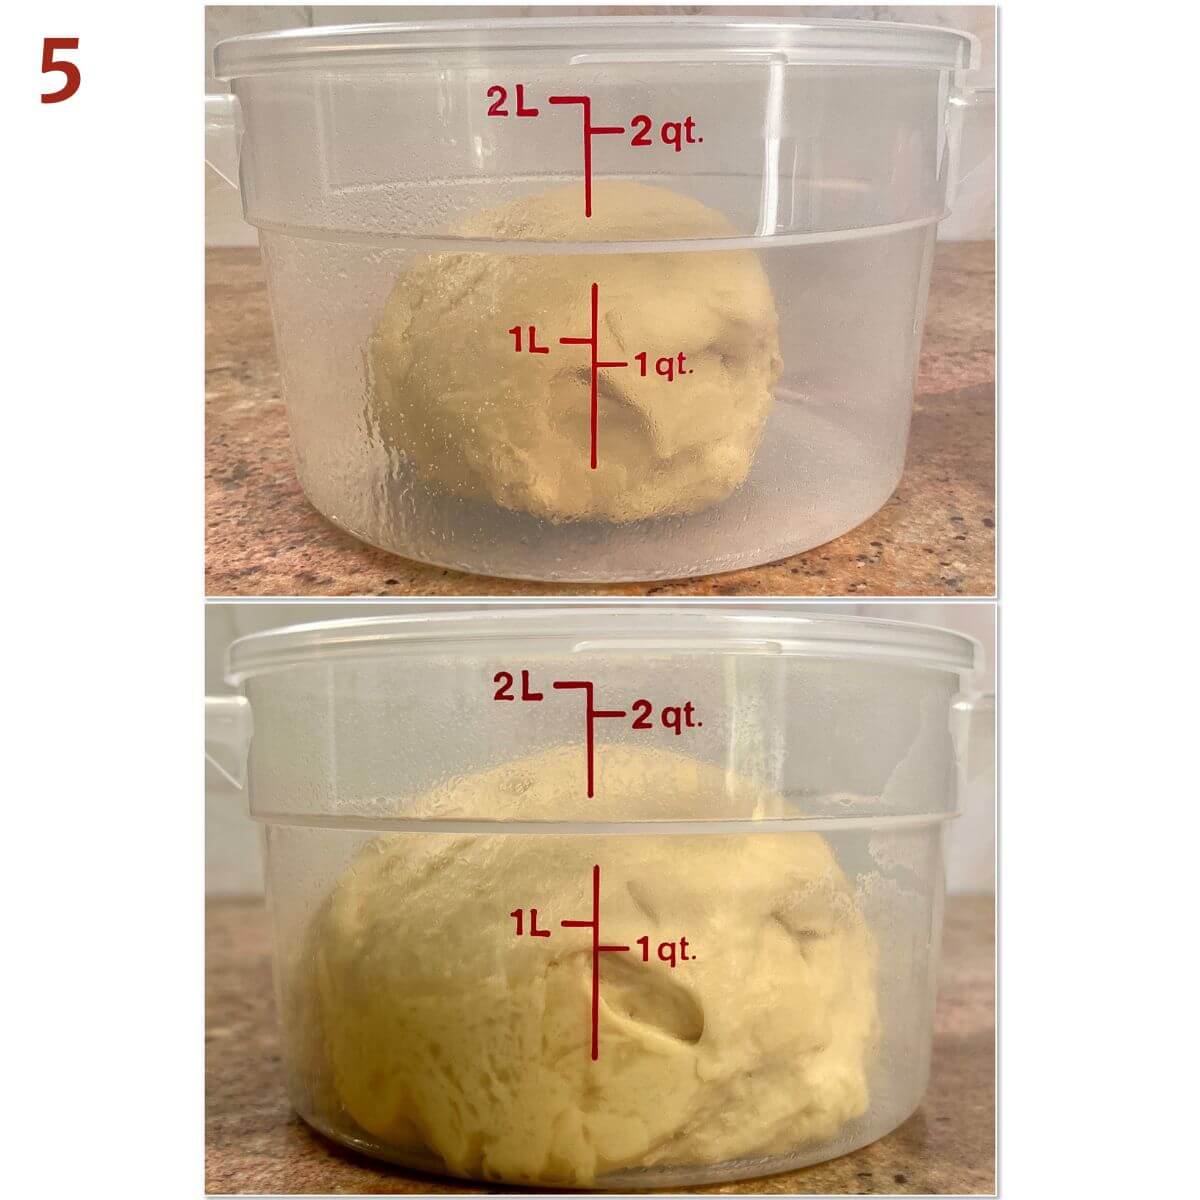 Collage of before and after the brioche dough's first rise in a plastic bucket.